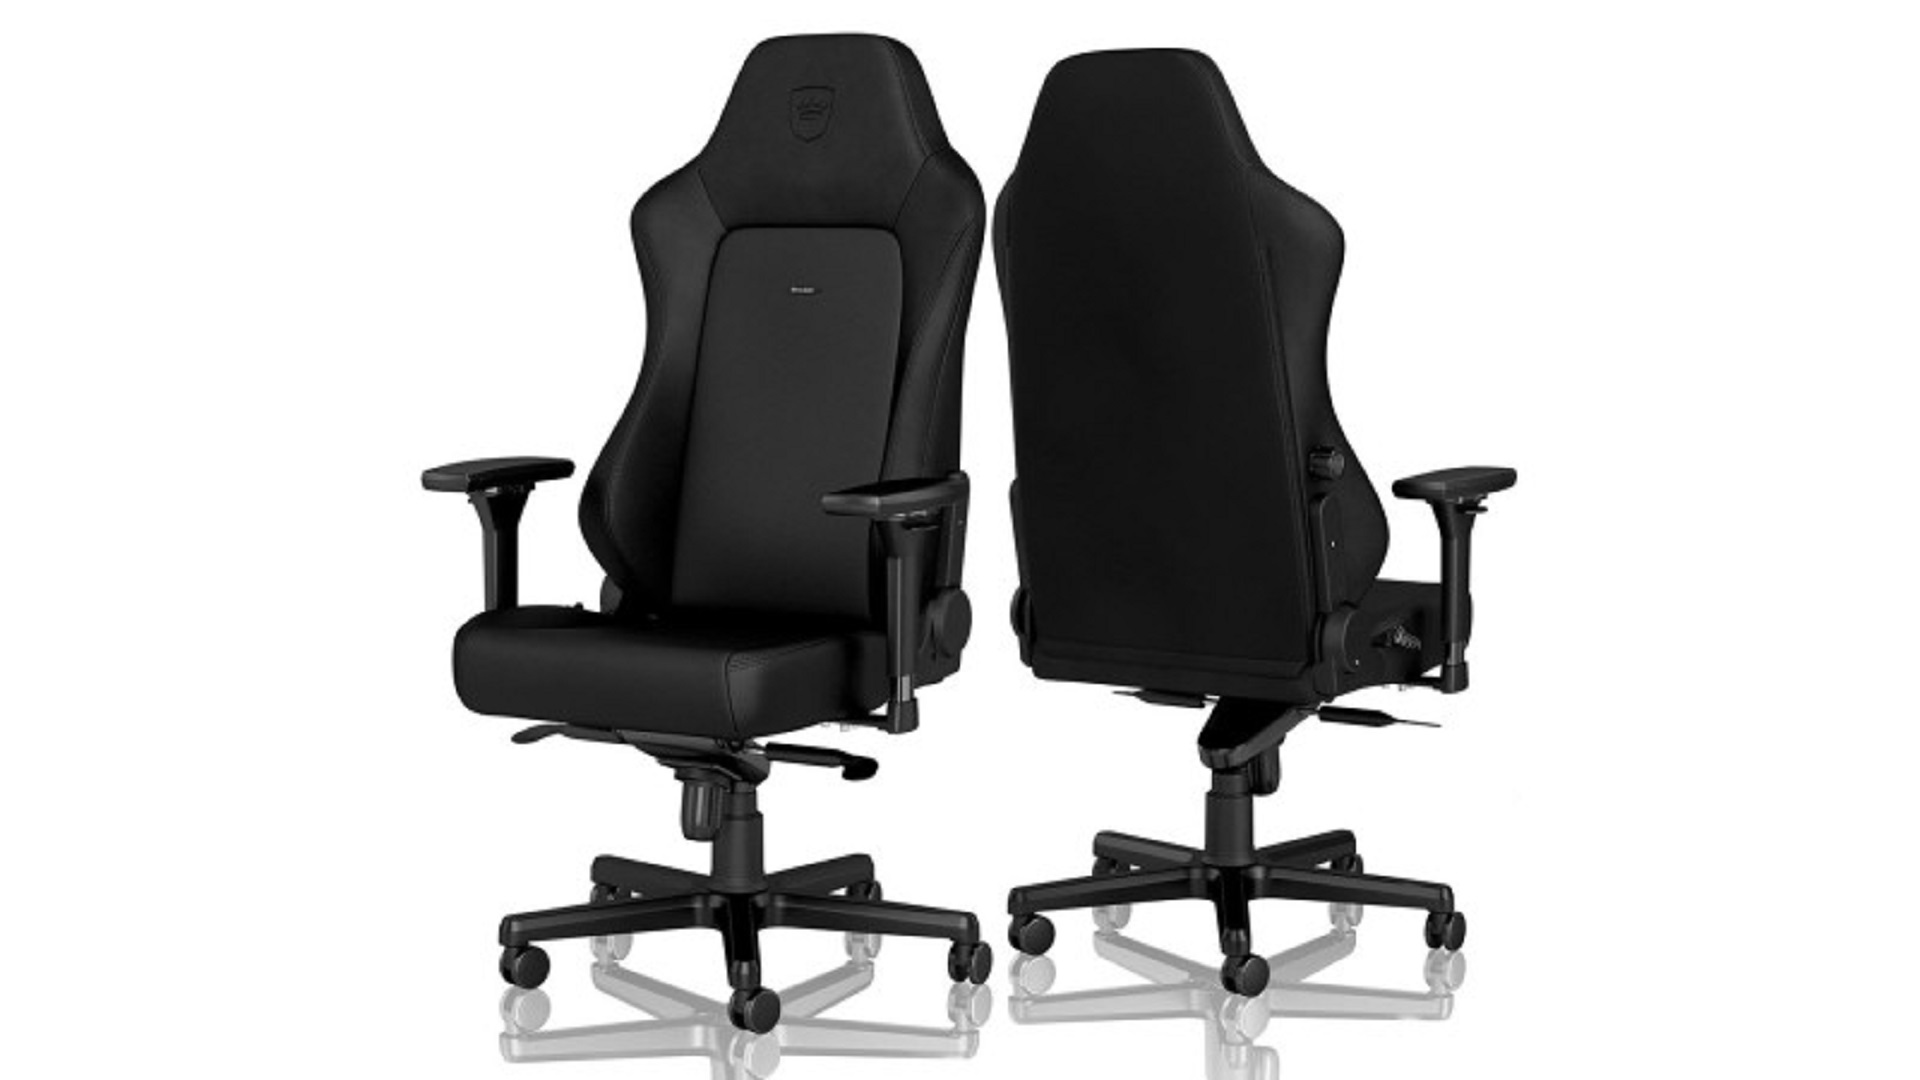 noblechairs Hero Black Edition review